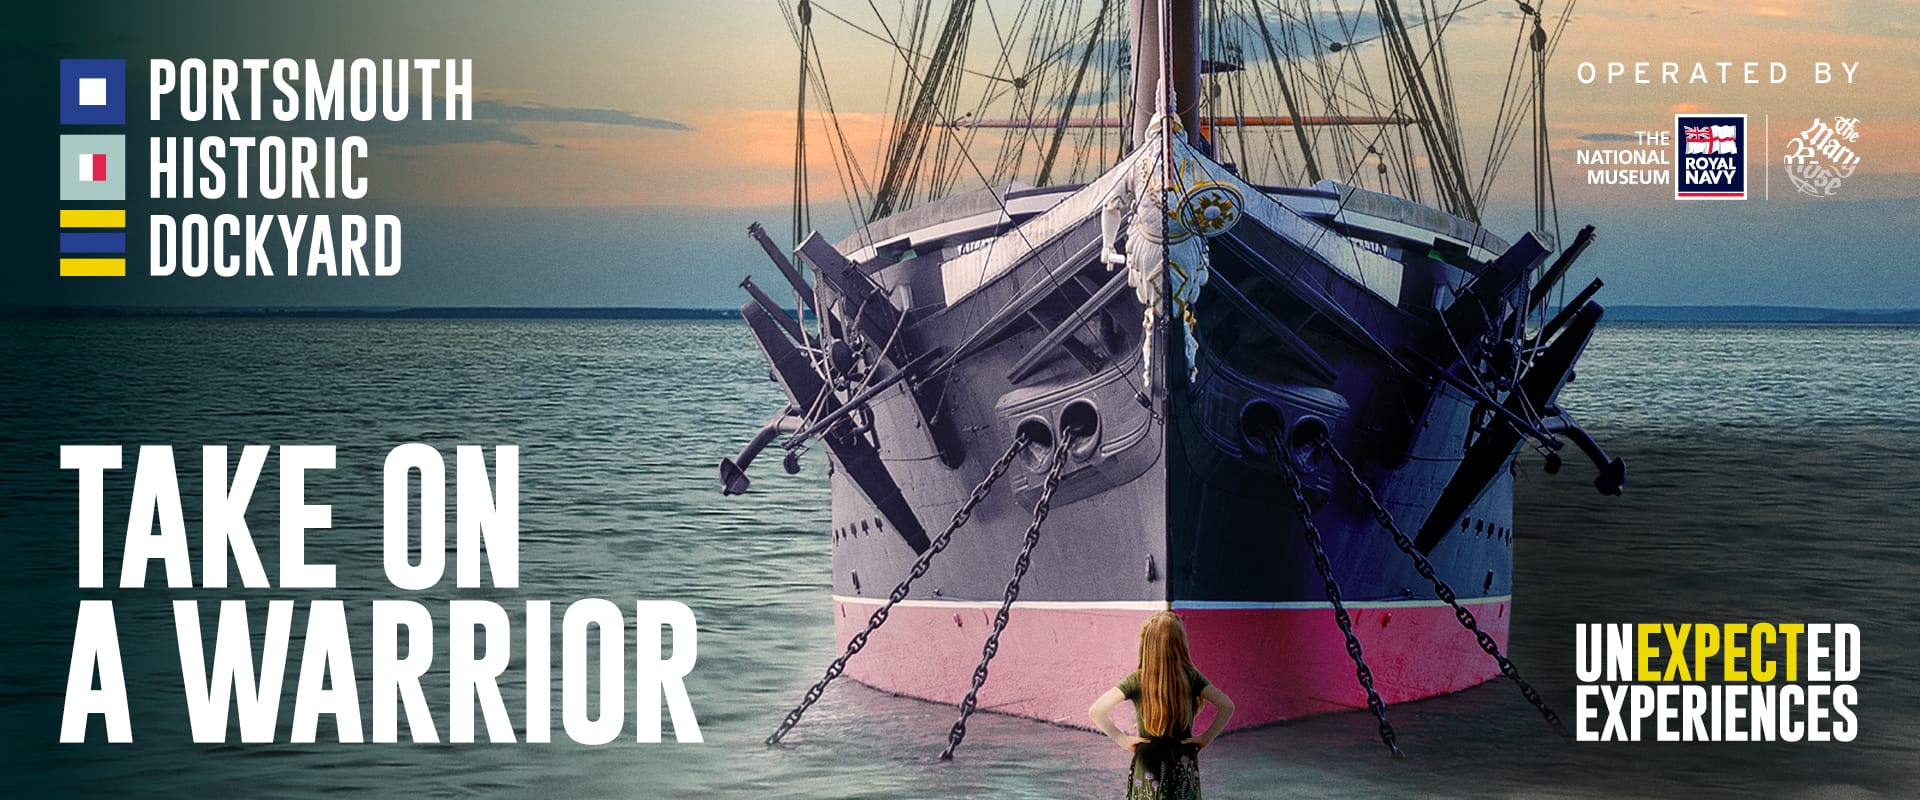 Take on a Warrior this May half term at Portsmouth Historic Dockyard